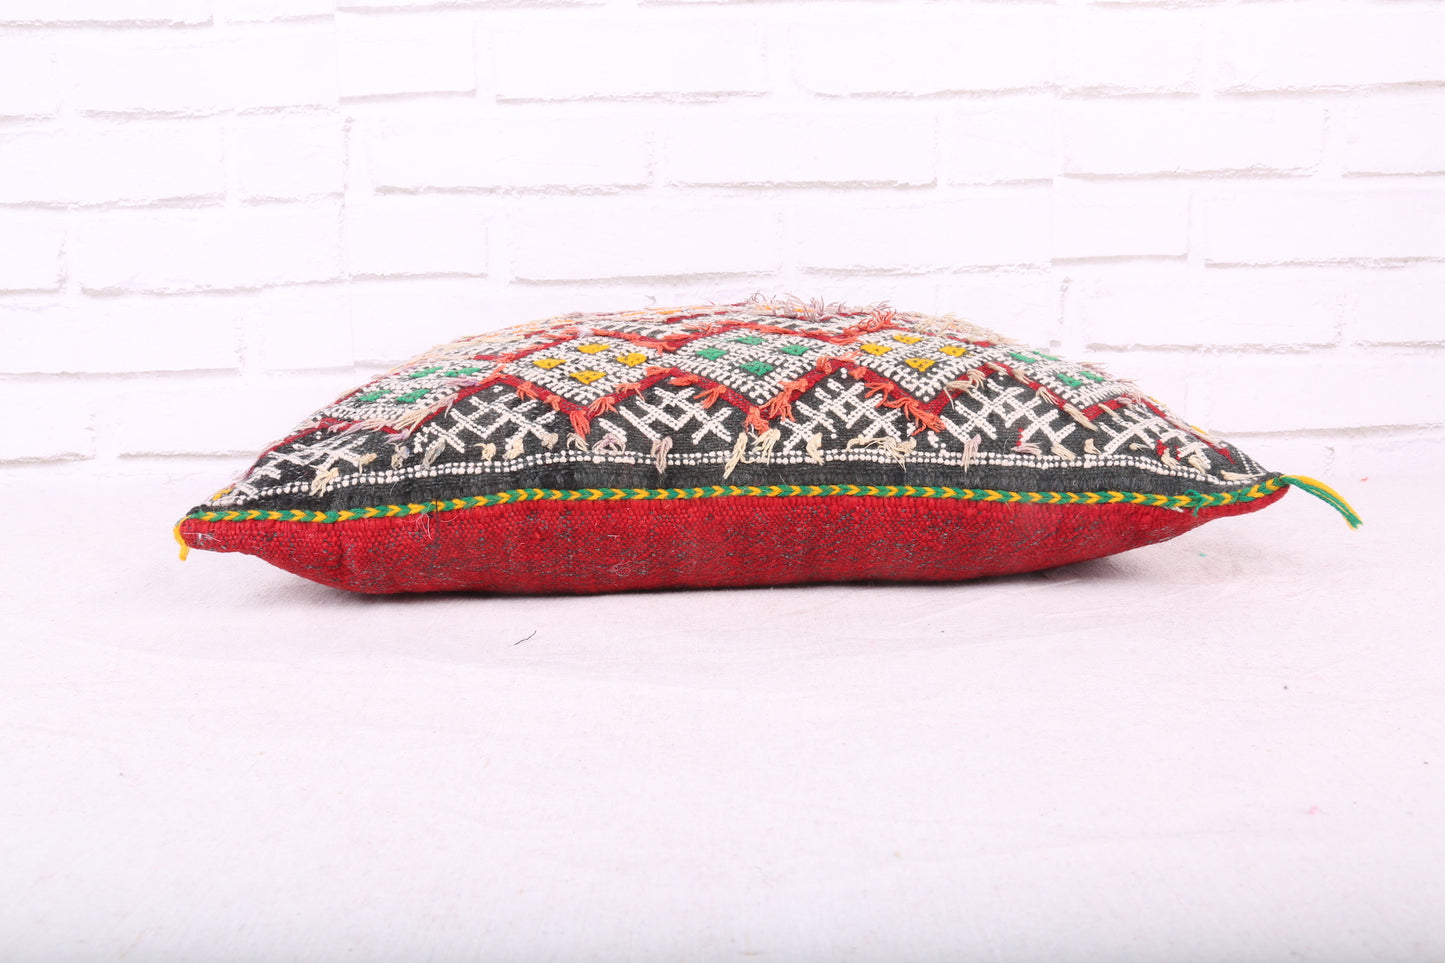 Stunning Square Moroccan Pillow 15.3 inches X 19.6 inches